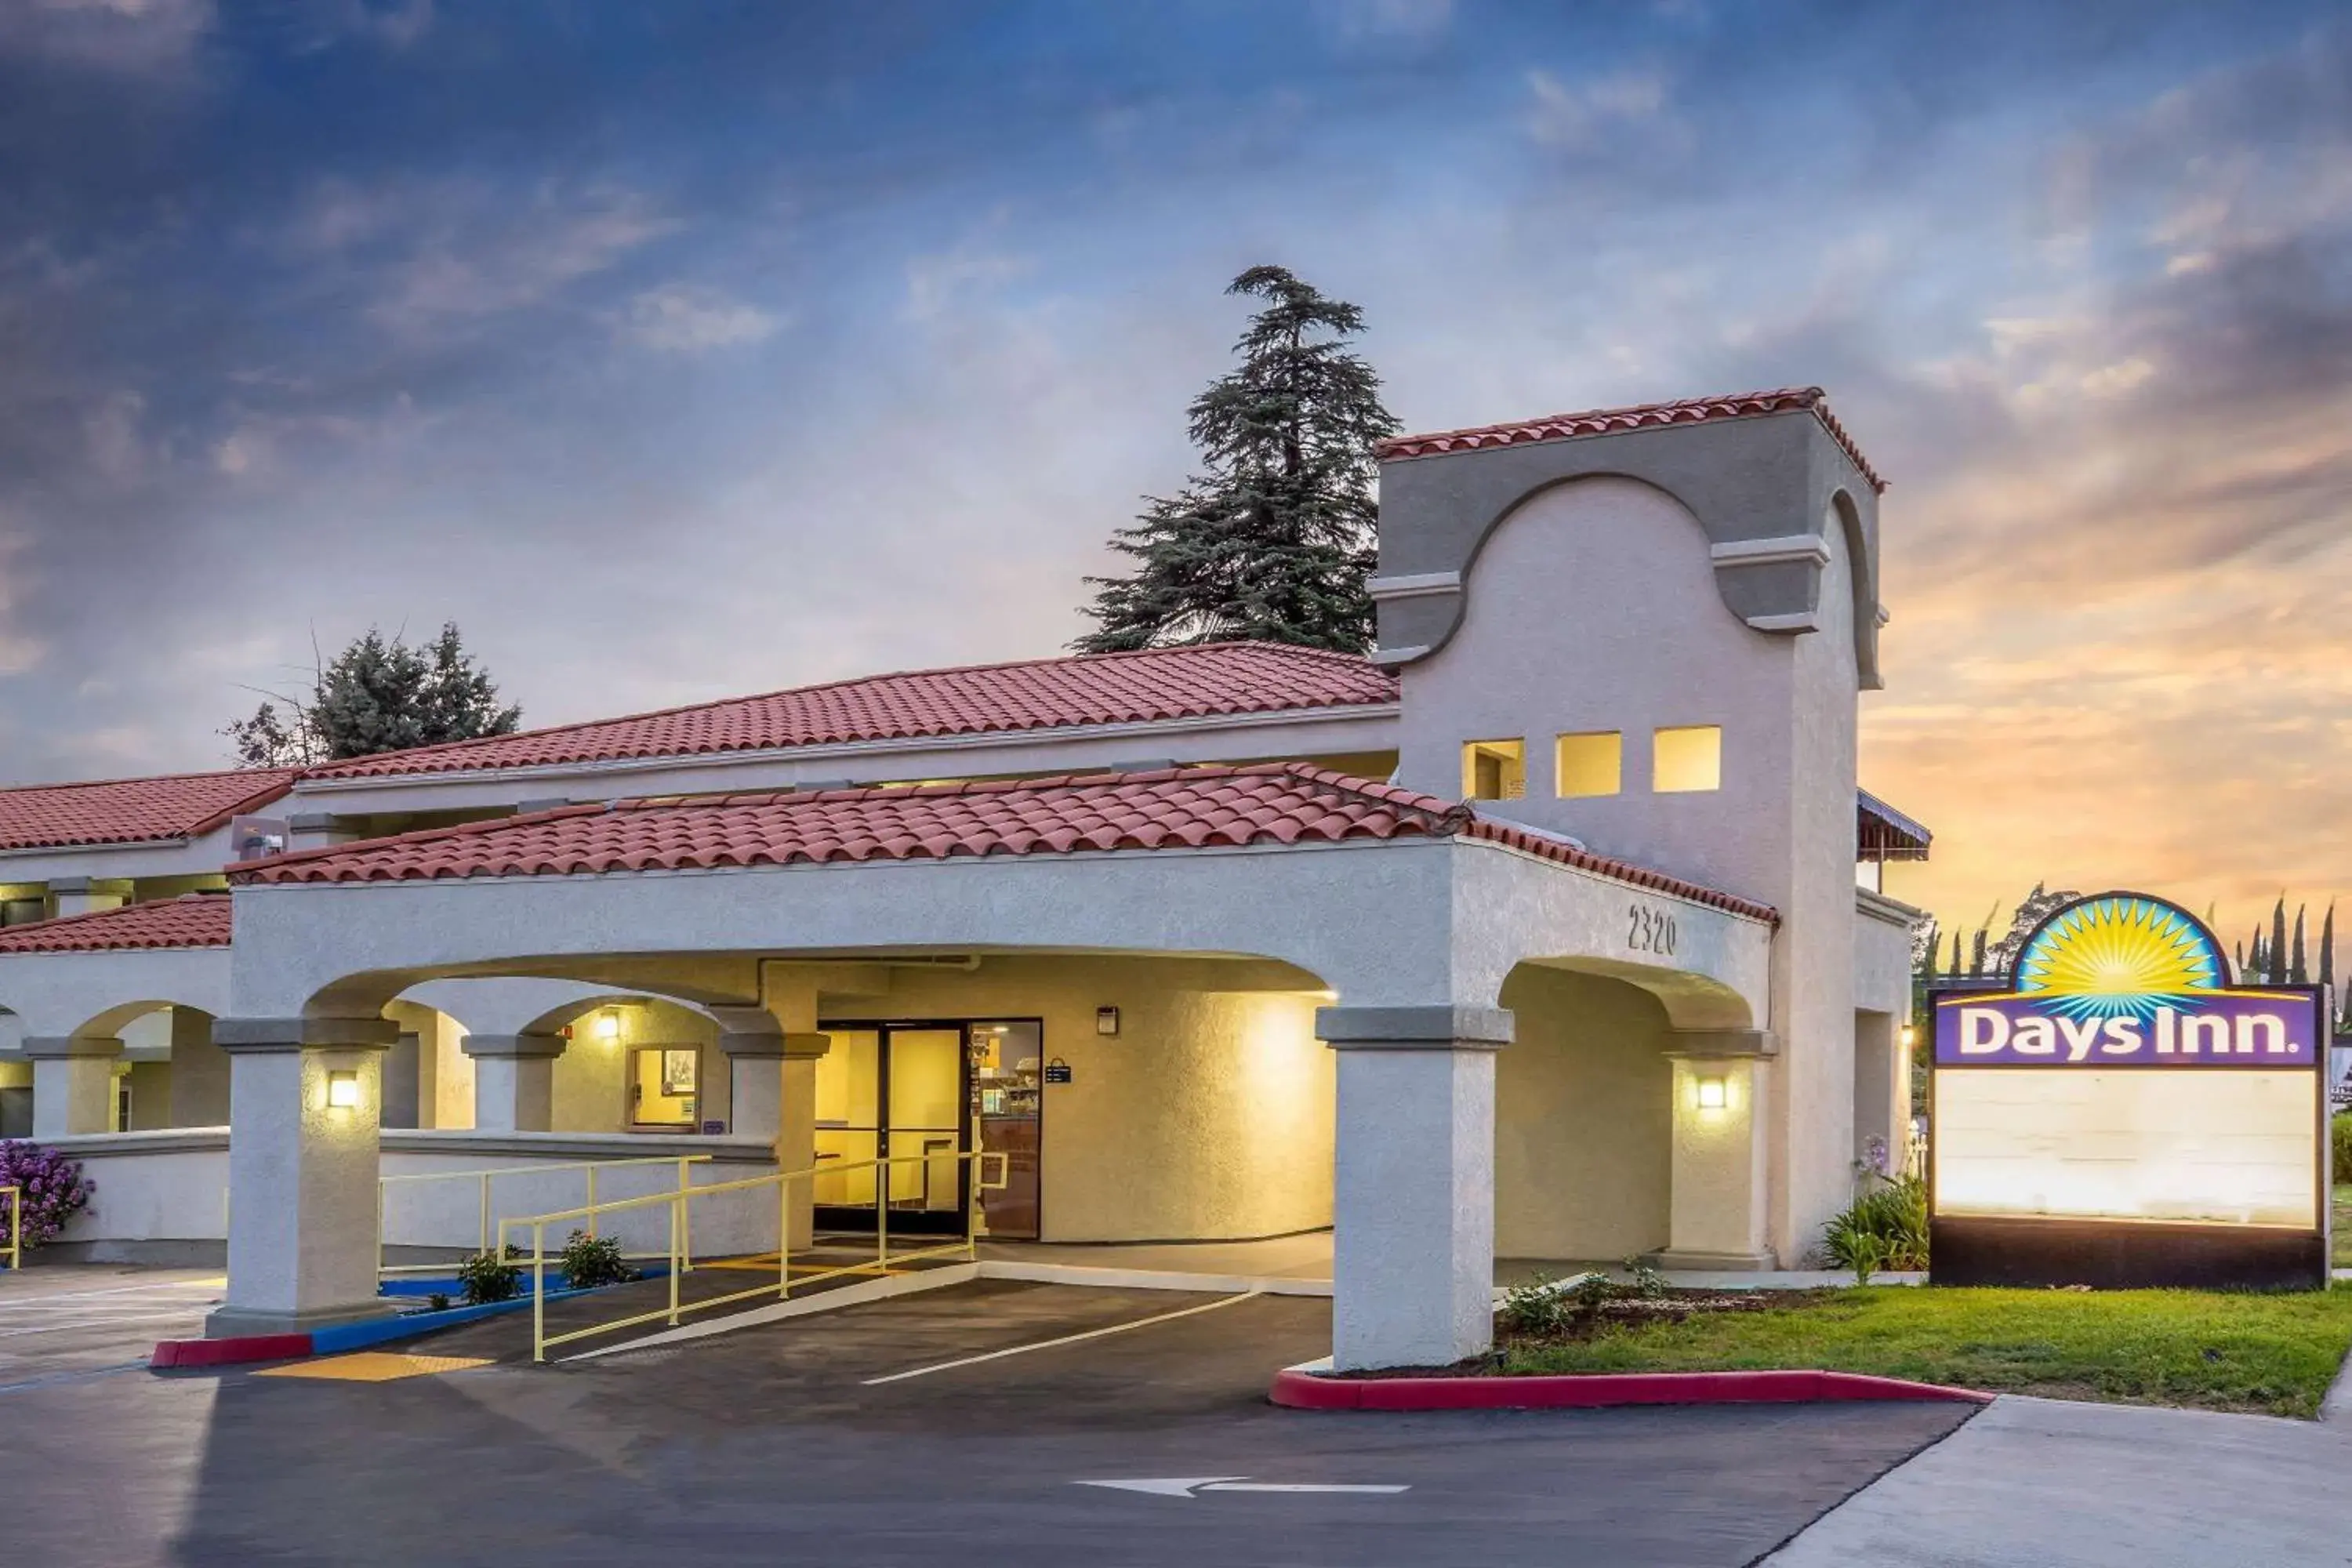 Property Building in Days Inn by Wyndham Banning Casino/Outlet Mall